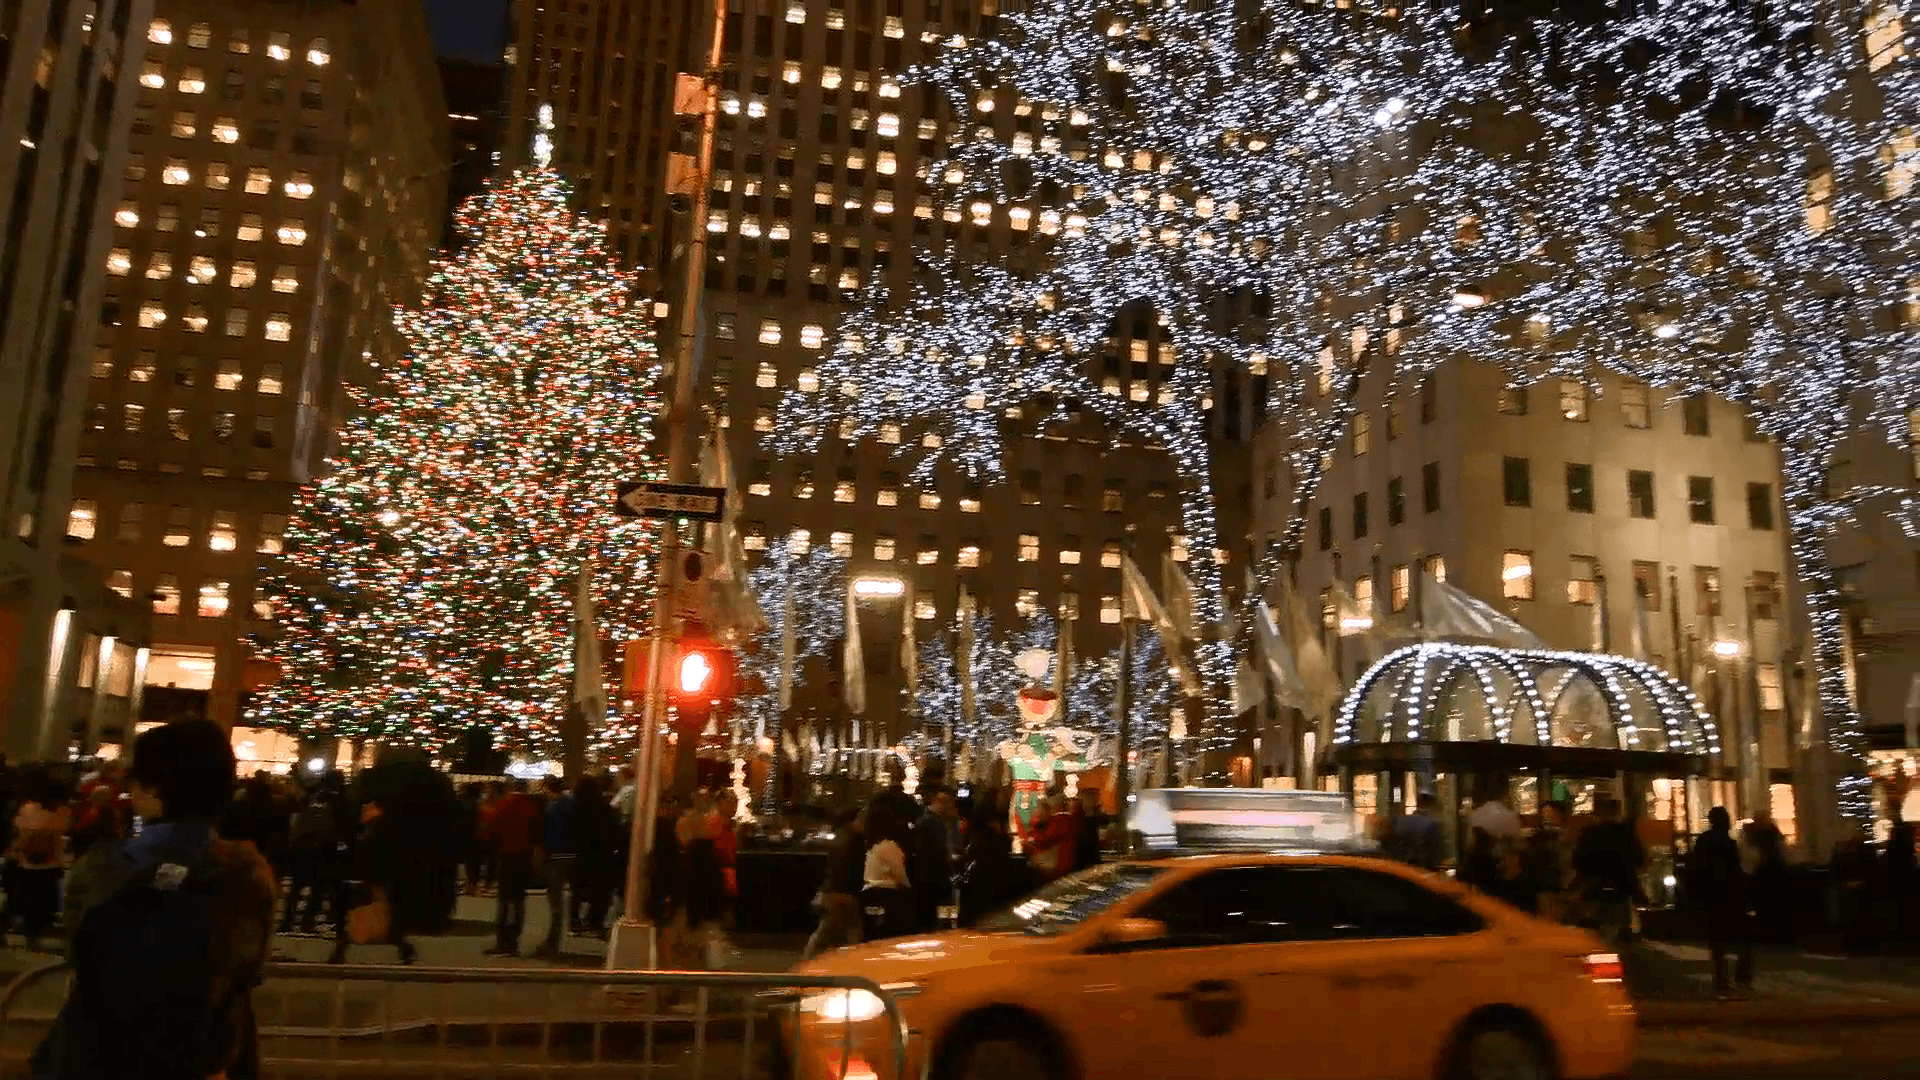 A Panning Video Of The Christmas Tree In Rockefeller